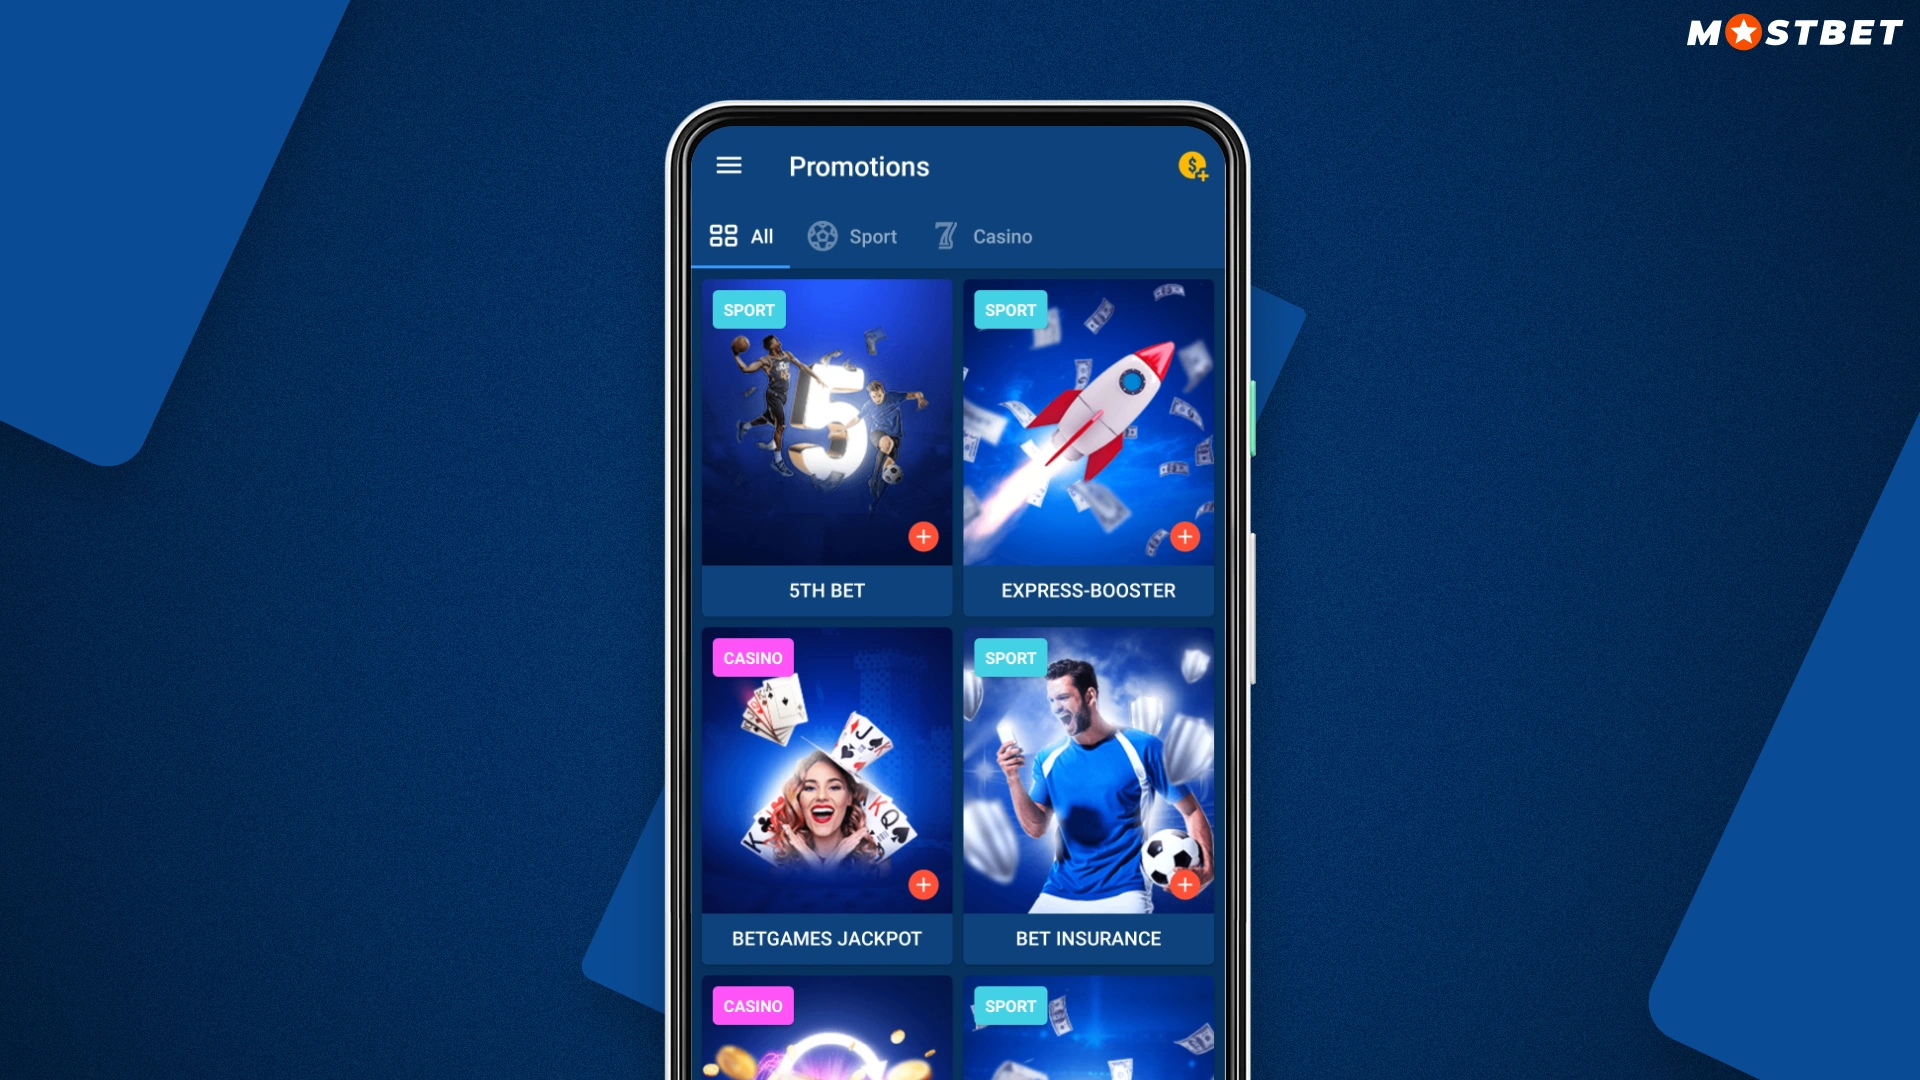 bonuses for players who have installed the mostbet app